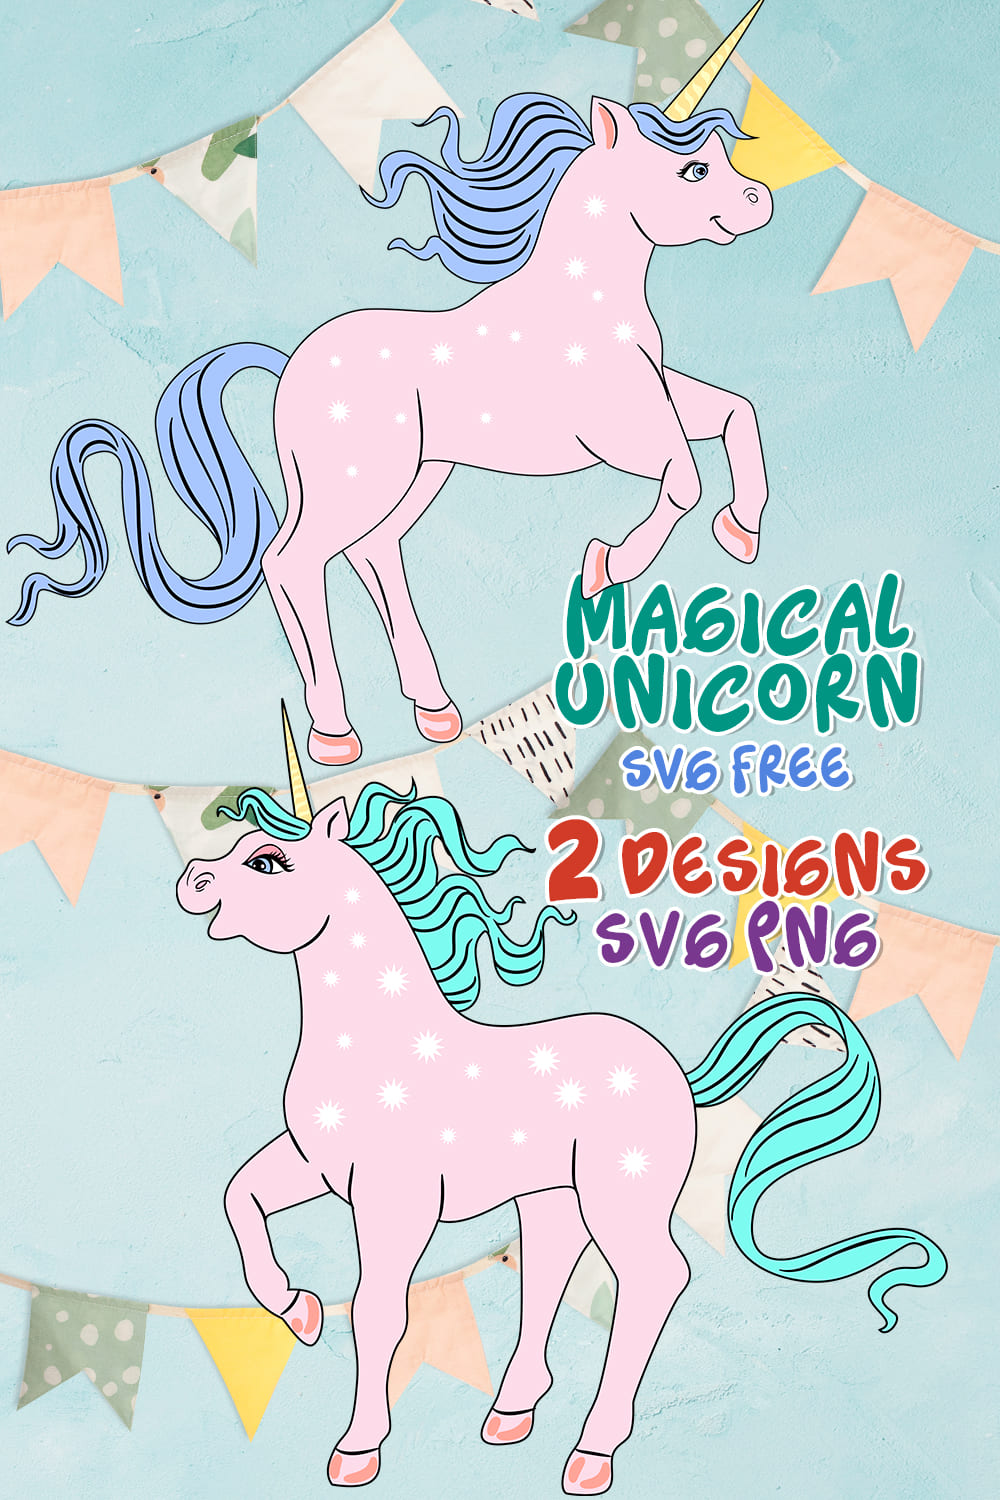 Magical Unicorn SVG Free - pinterest image preview.